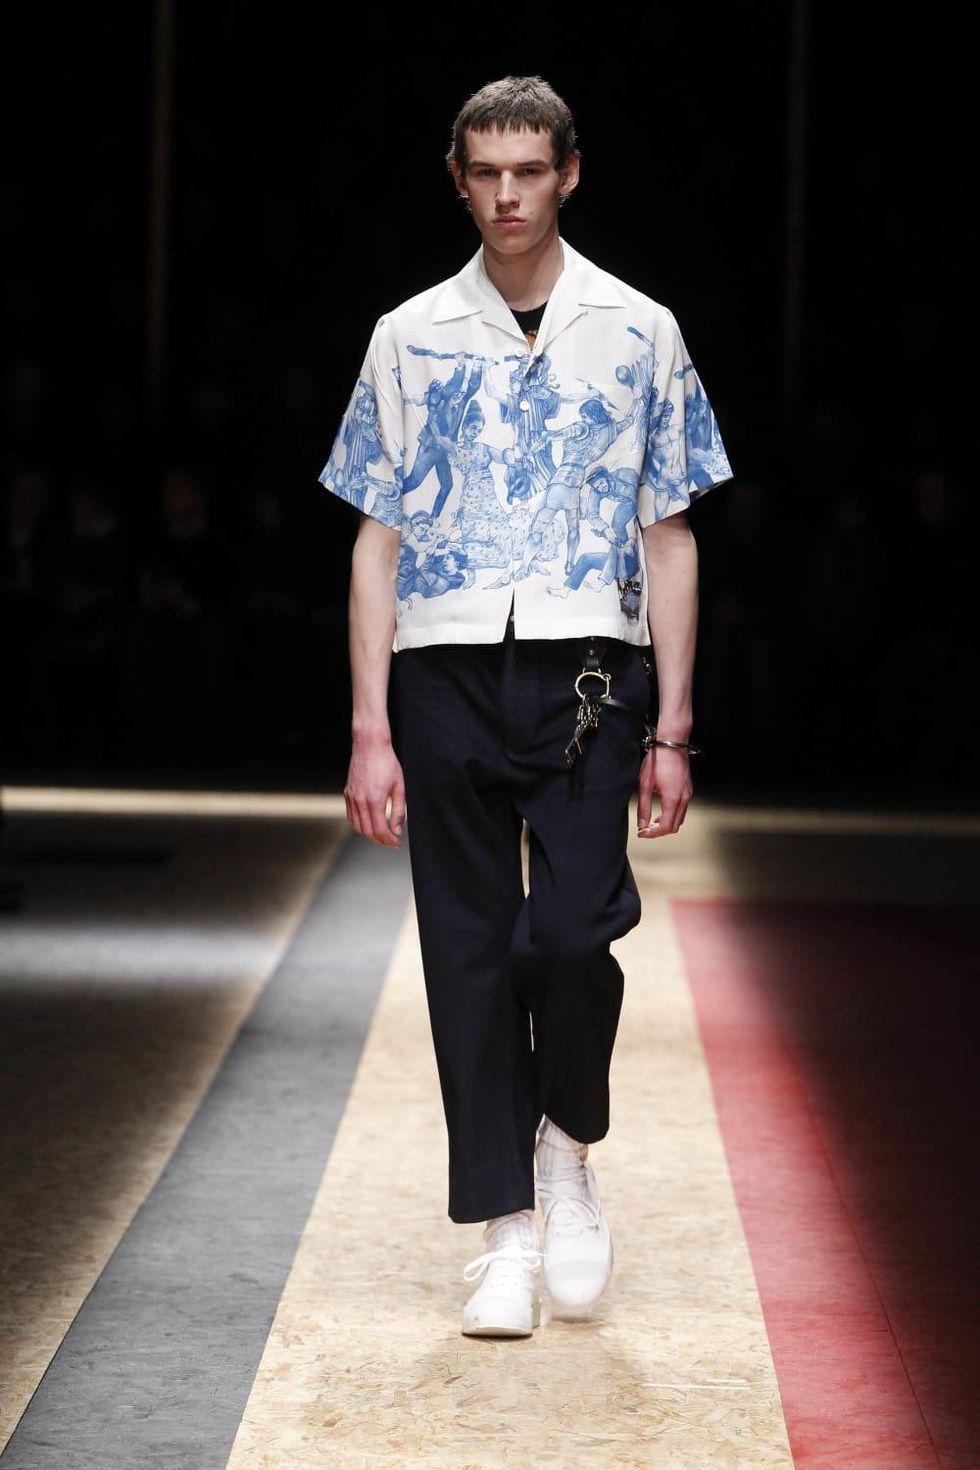 Ship ahoy! Prada's nautical-themed menswear collection offers cool looks  for women, too - CultureMap Houston